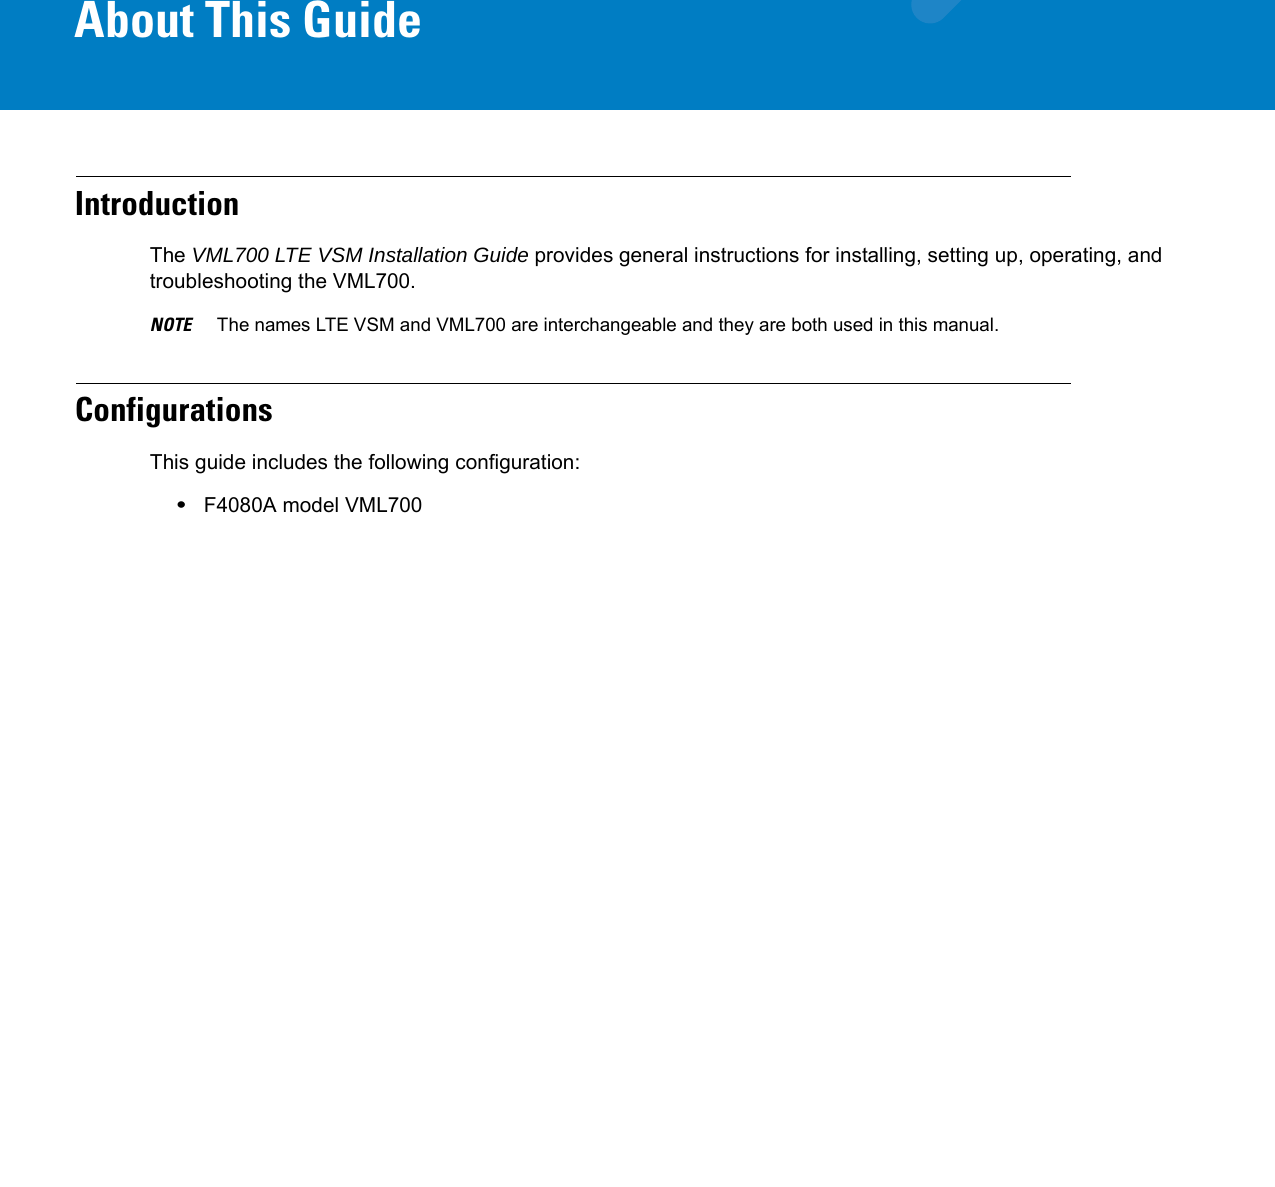 About This GuideIntroductionThe VML700 LTE VSM Installation Guide provides general instructions for installing, setting up, operating, and troubleshooting the VML700.NOTE     The names LTE VSM and VML700 are interchangeable and they are both used in this manual.ConfigurationsThis guide includes the following configuration:•F4080A model VML700